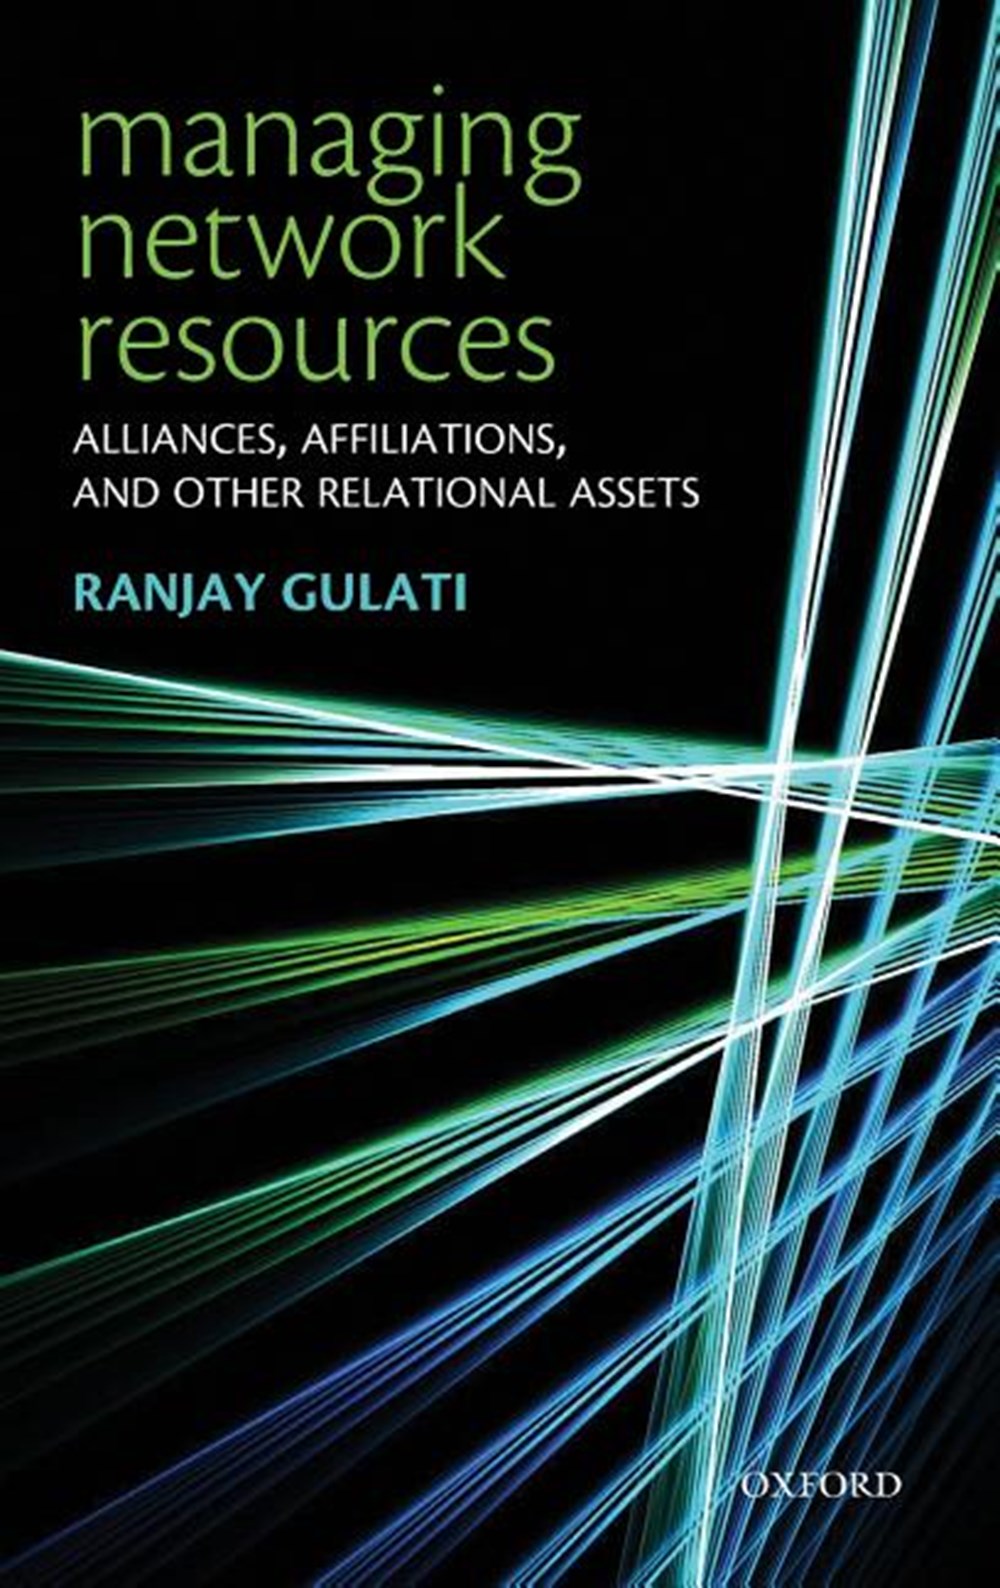 Managing Network Resources Alliances, Affiliations, and Other Relational Assets